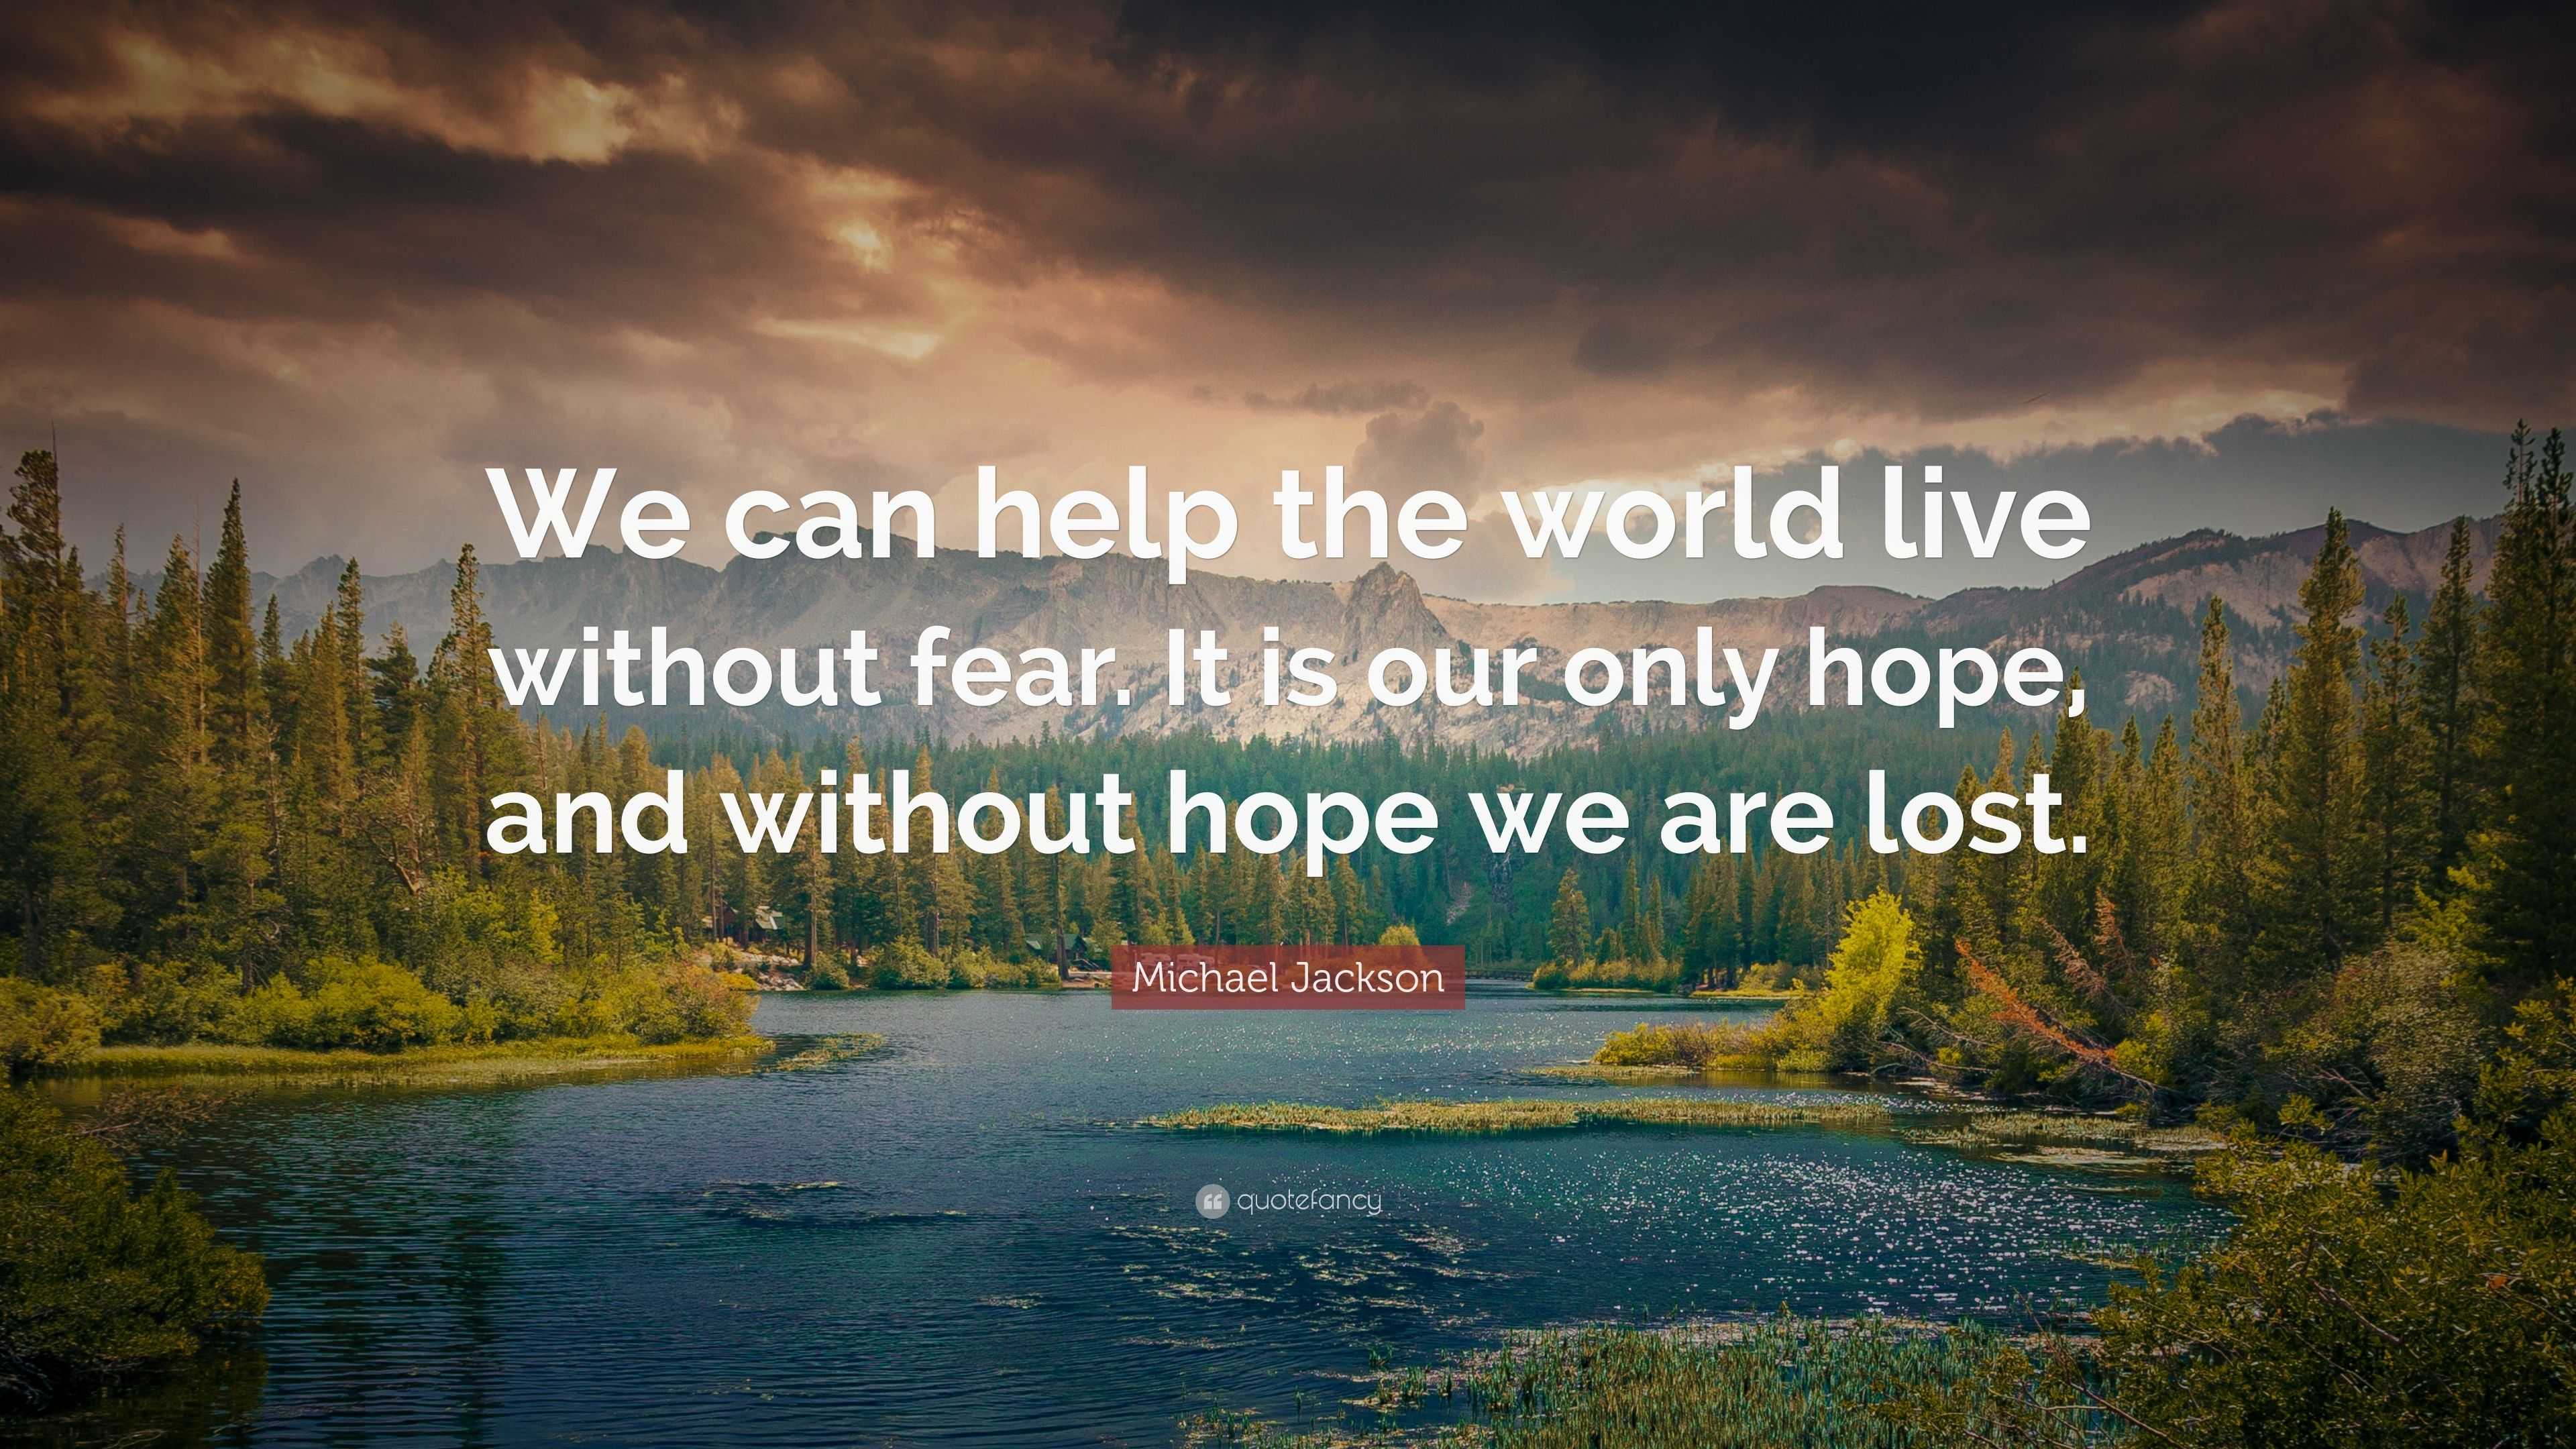 Michael Jackson Quote  We can help the world live without  